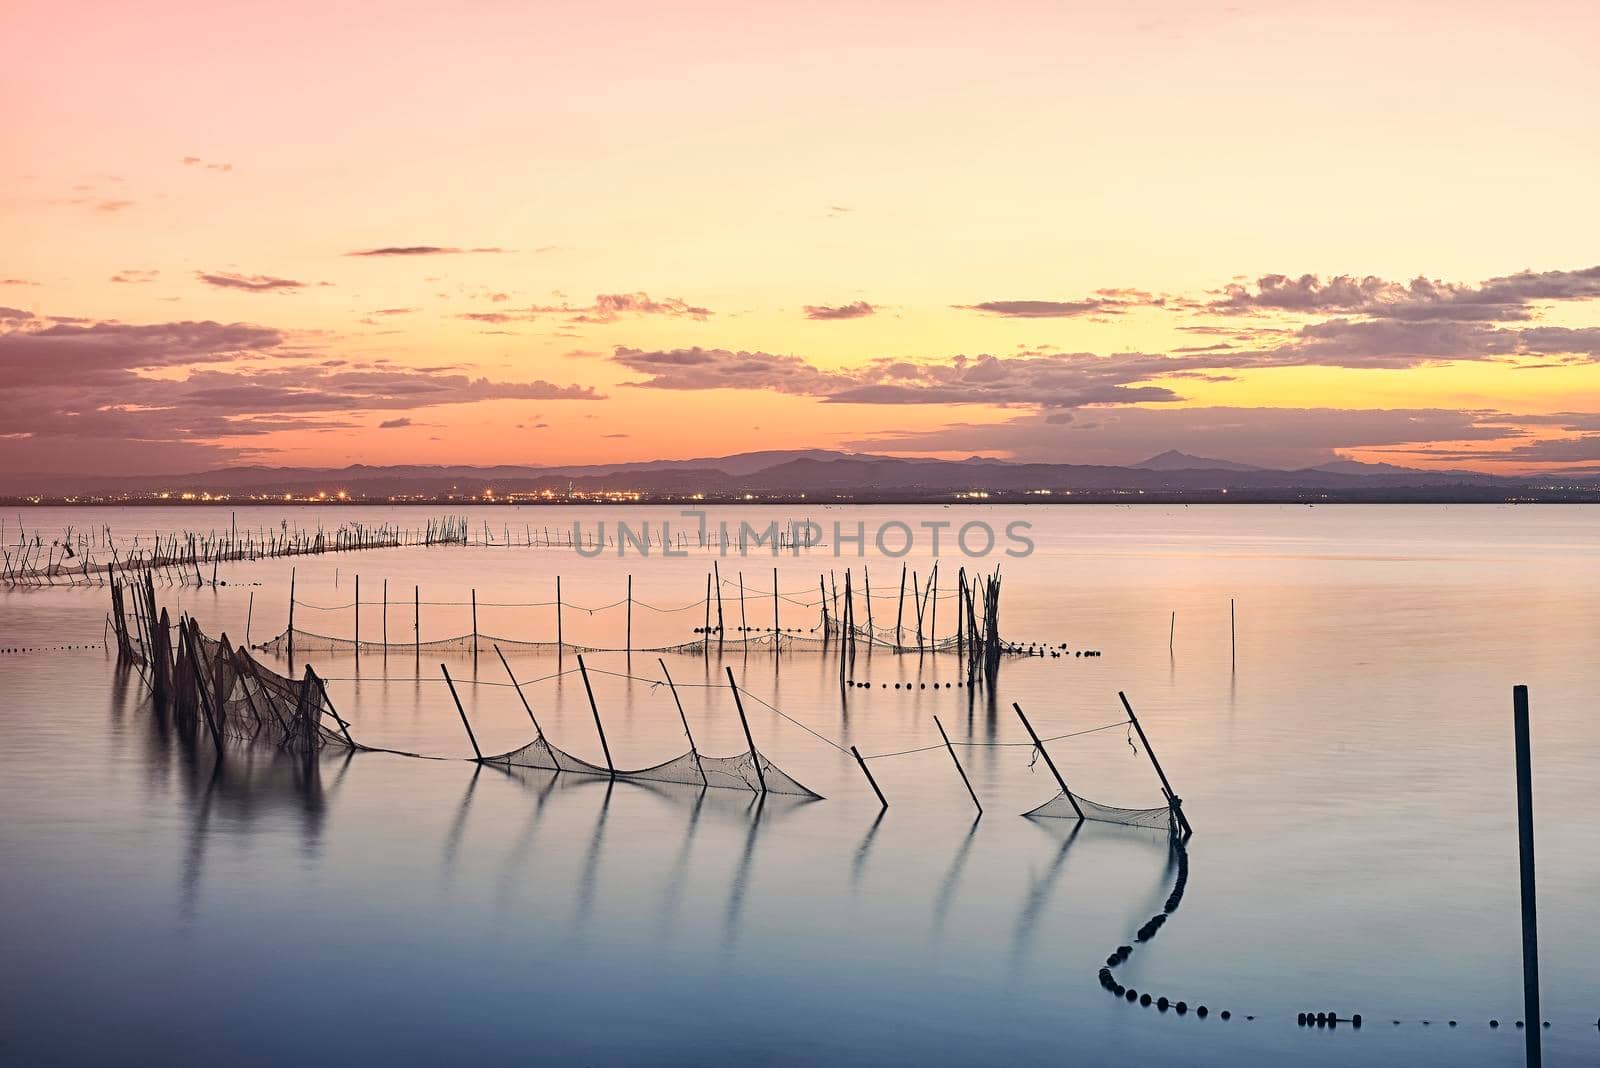 Sunset on the Valencia lagoon between the nets. Long exposure photography, orange and yellow tones. silk effect water.